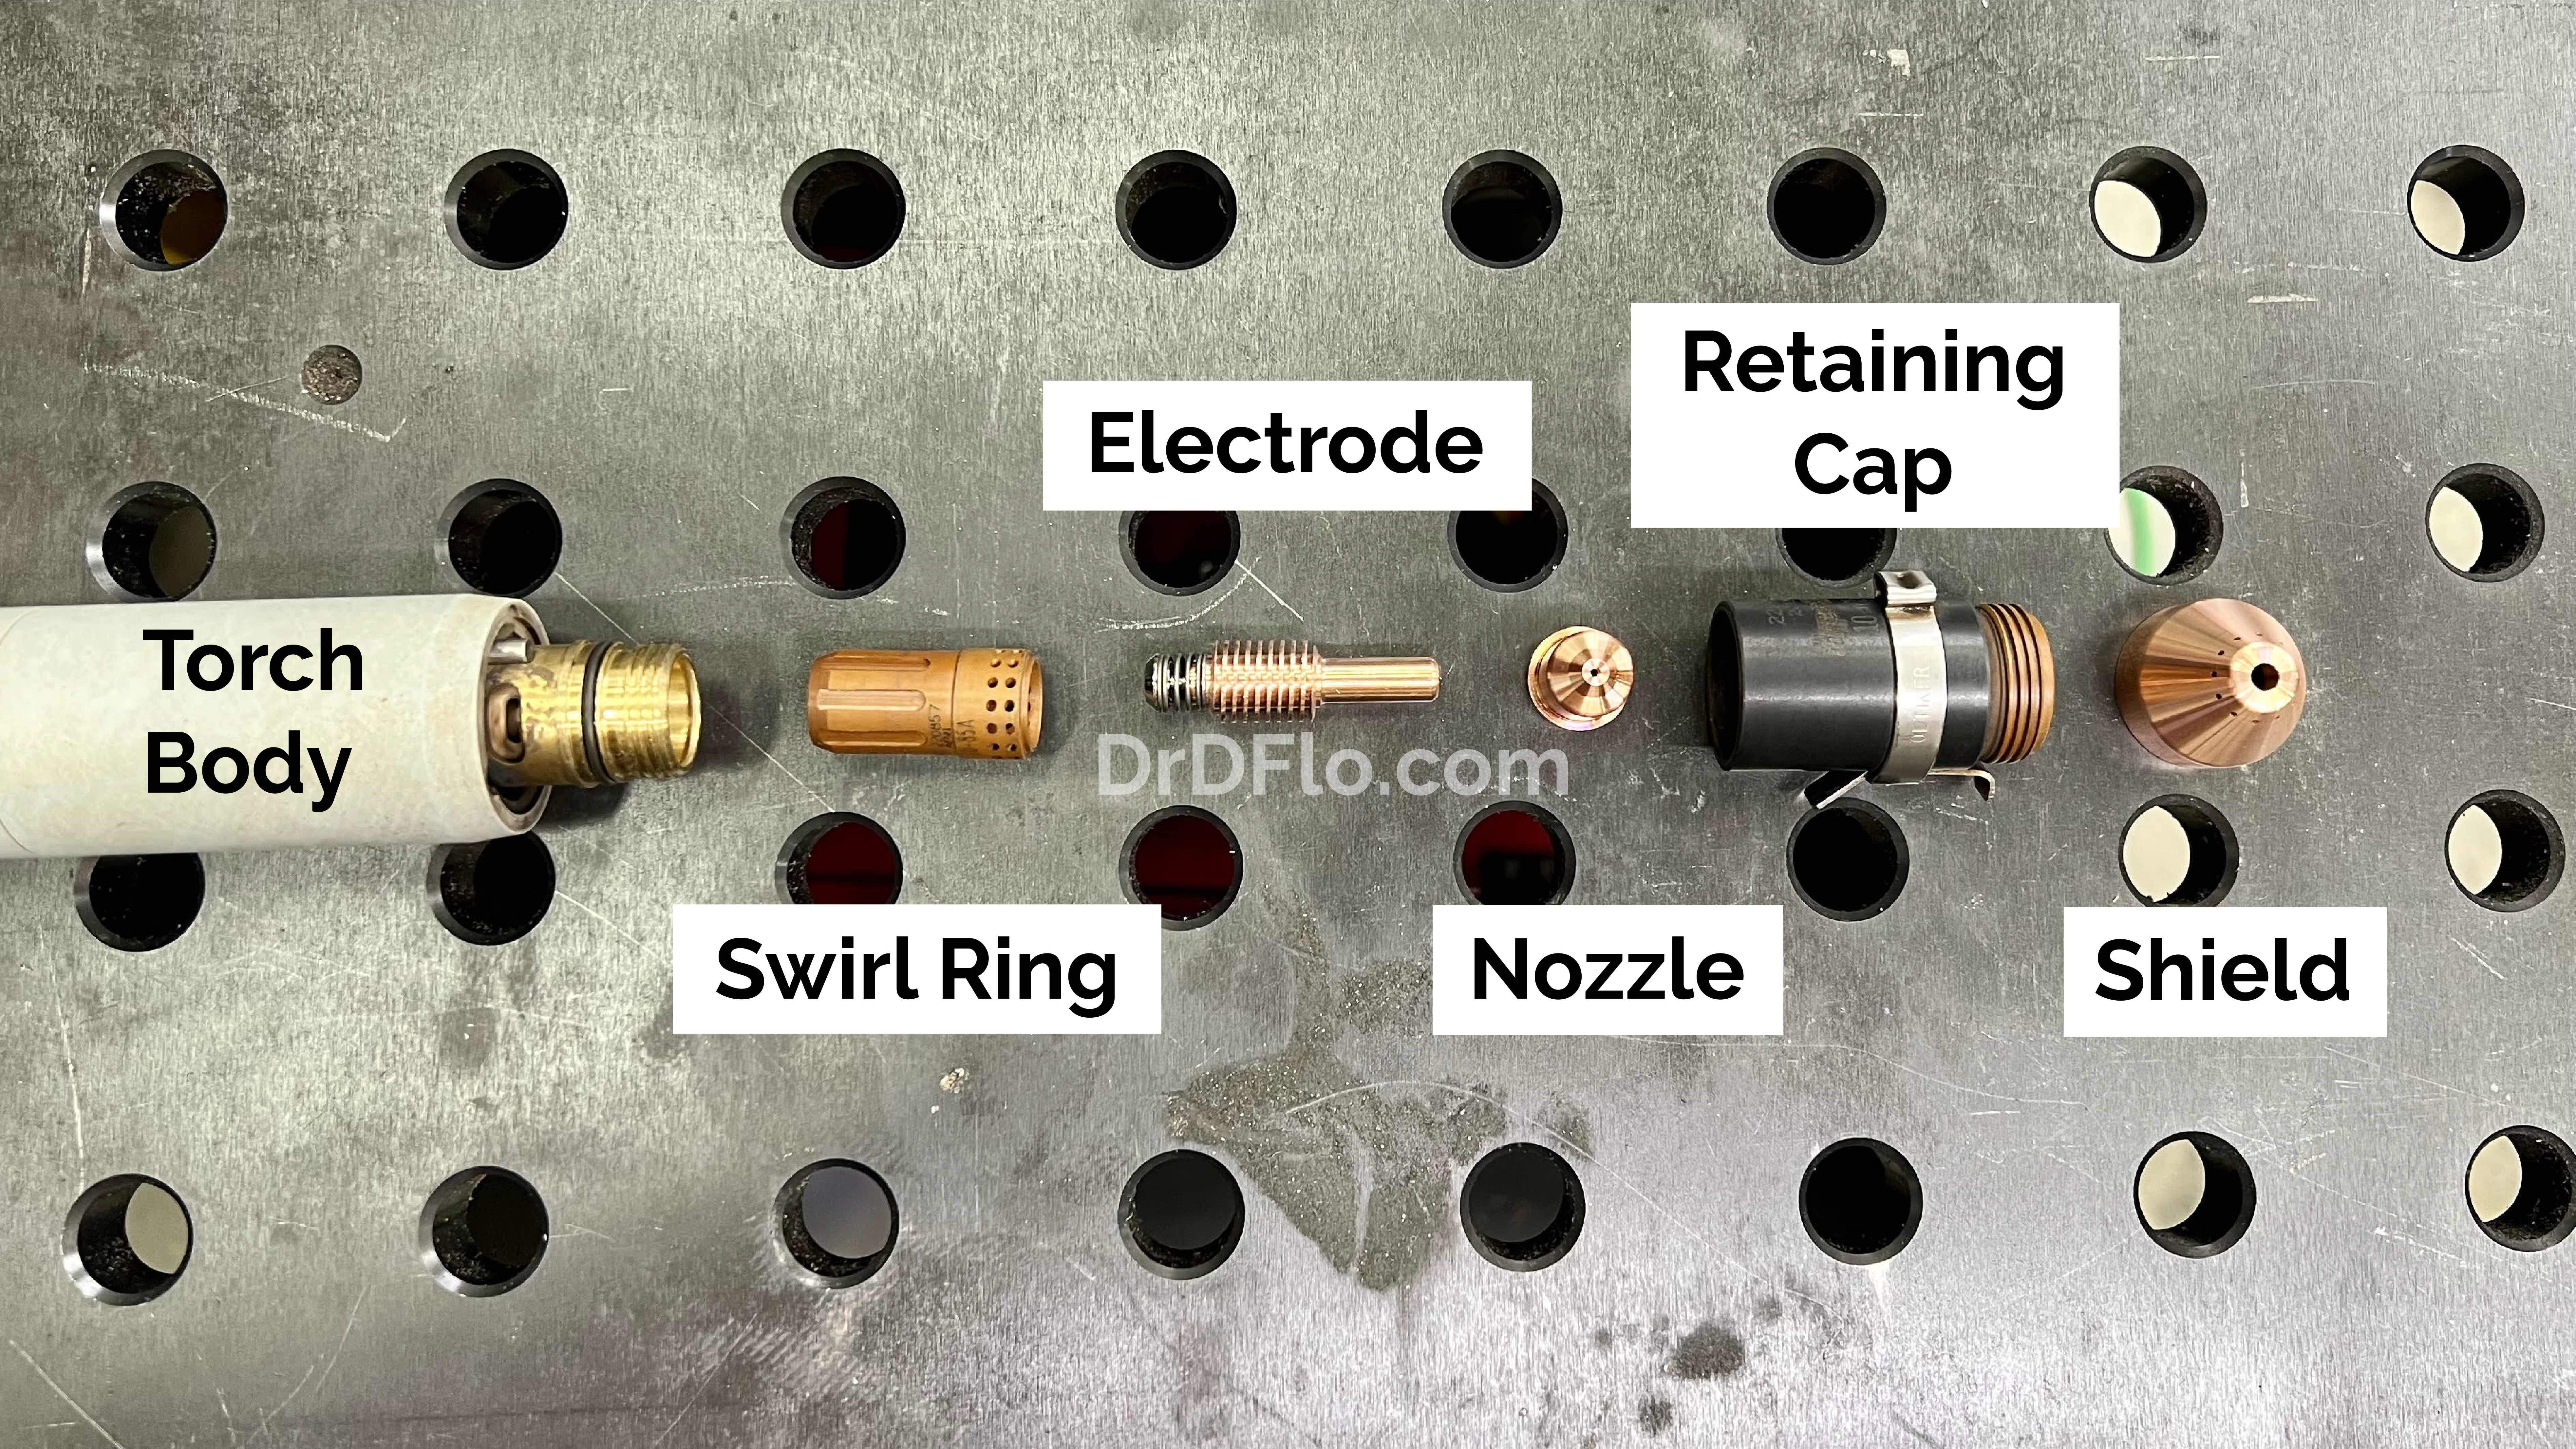 Consumables in a plasma torch, including swirl ring, electrode, nozzle, retaining cap, and shield.